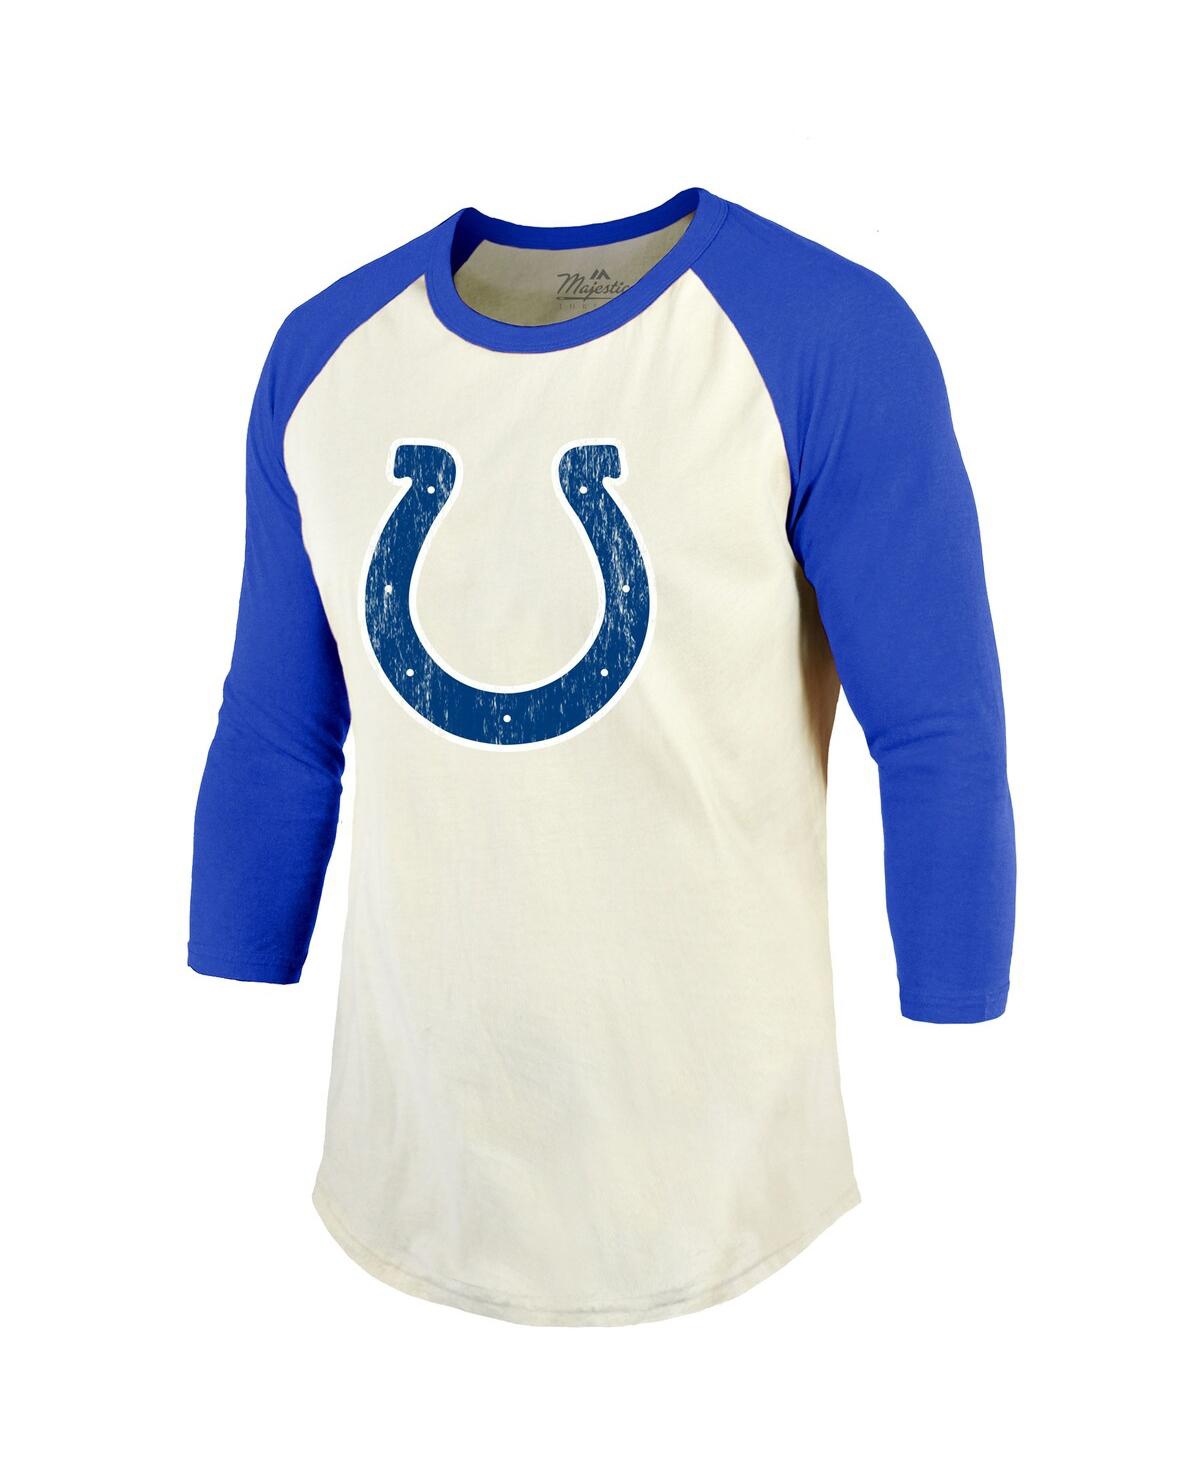 Shop Majestic Men's  Threads Jonathan Taylor Cream, Royal Indianapolis Colts Player Name And Number Raglan In Cream,royal